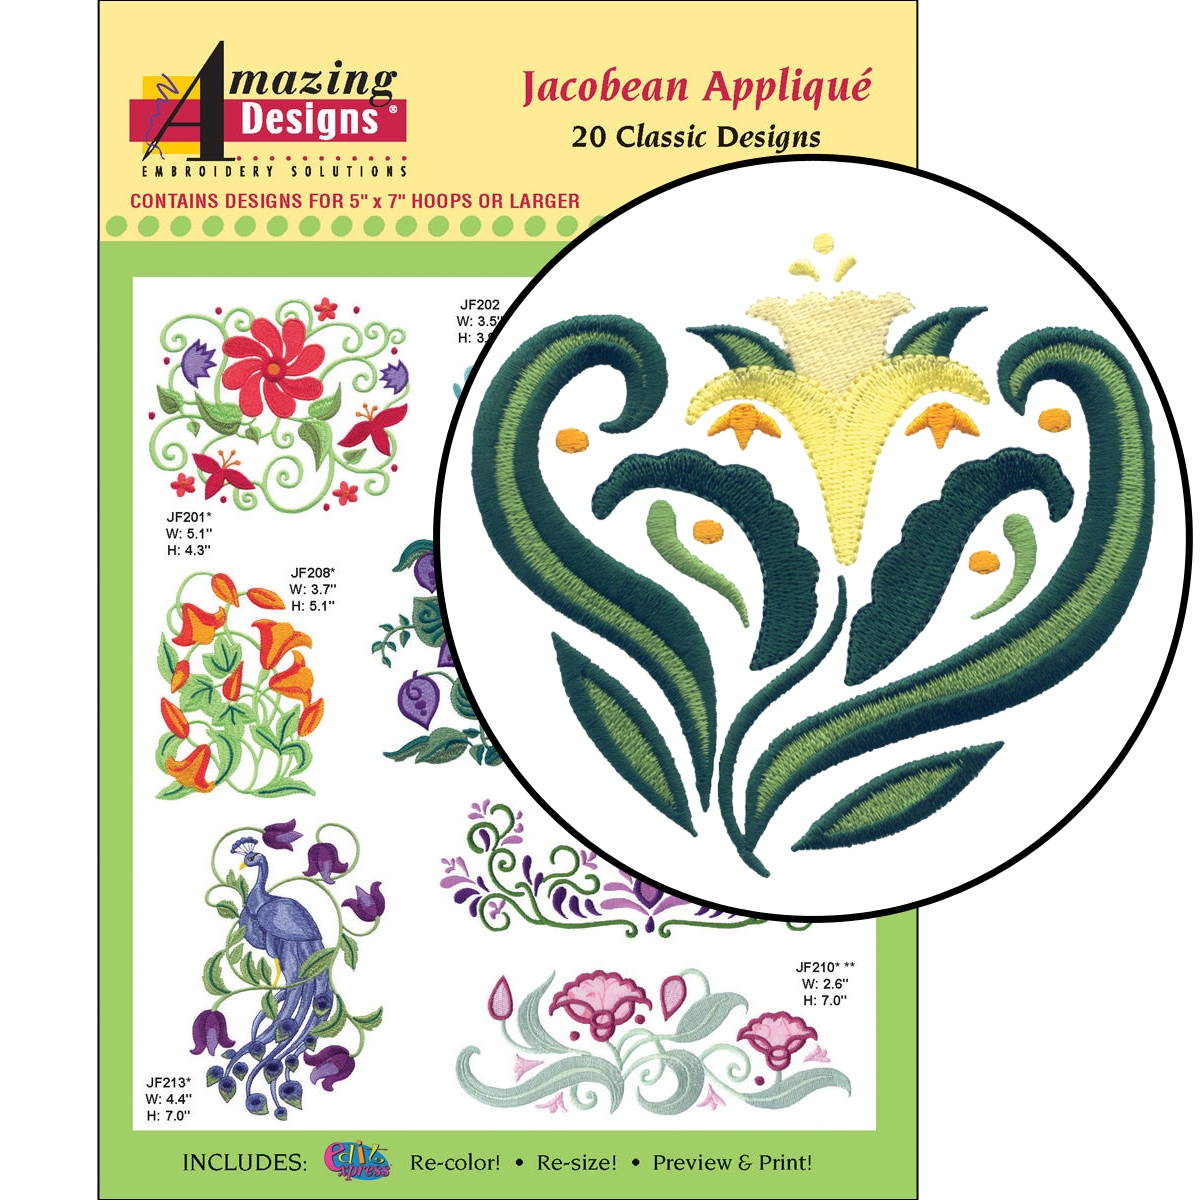 Jacobean Embroidery Patterns Amazing Designs Jacobean Applique Embroidery Designs